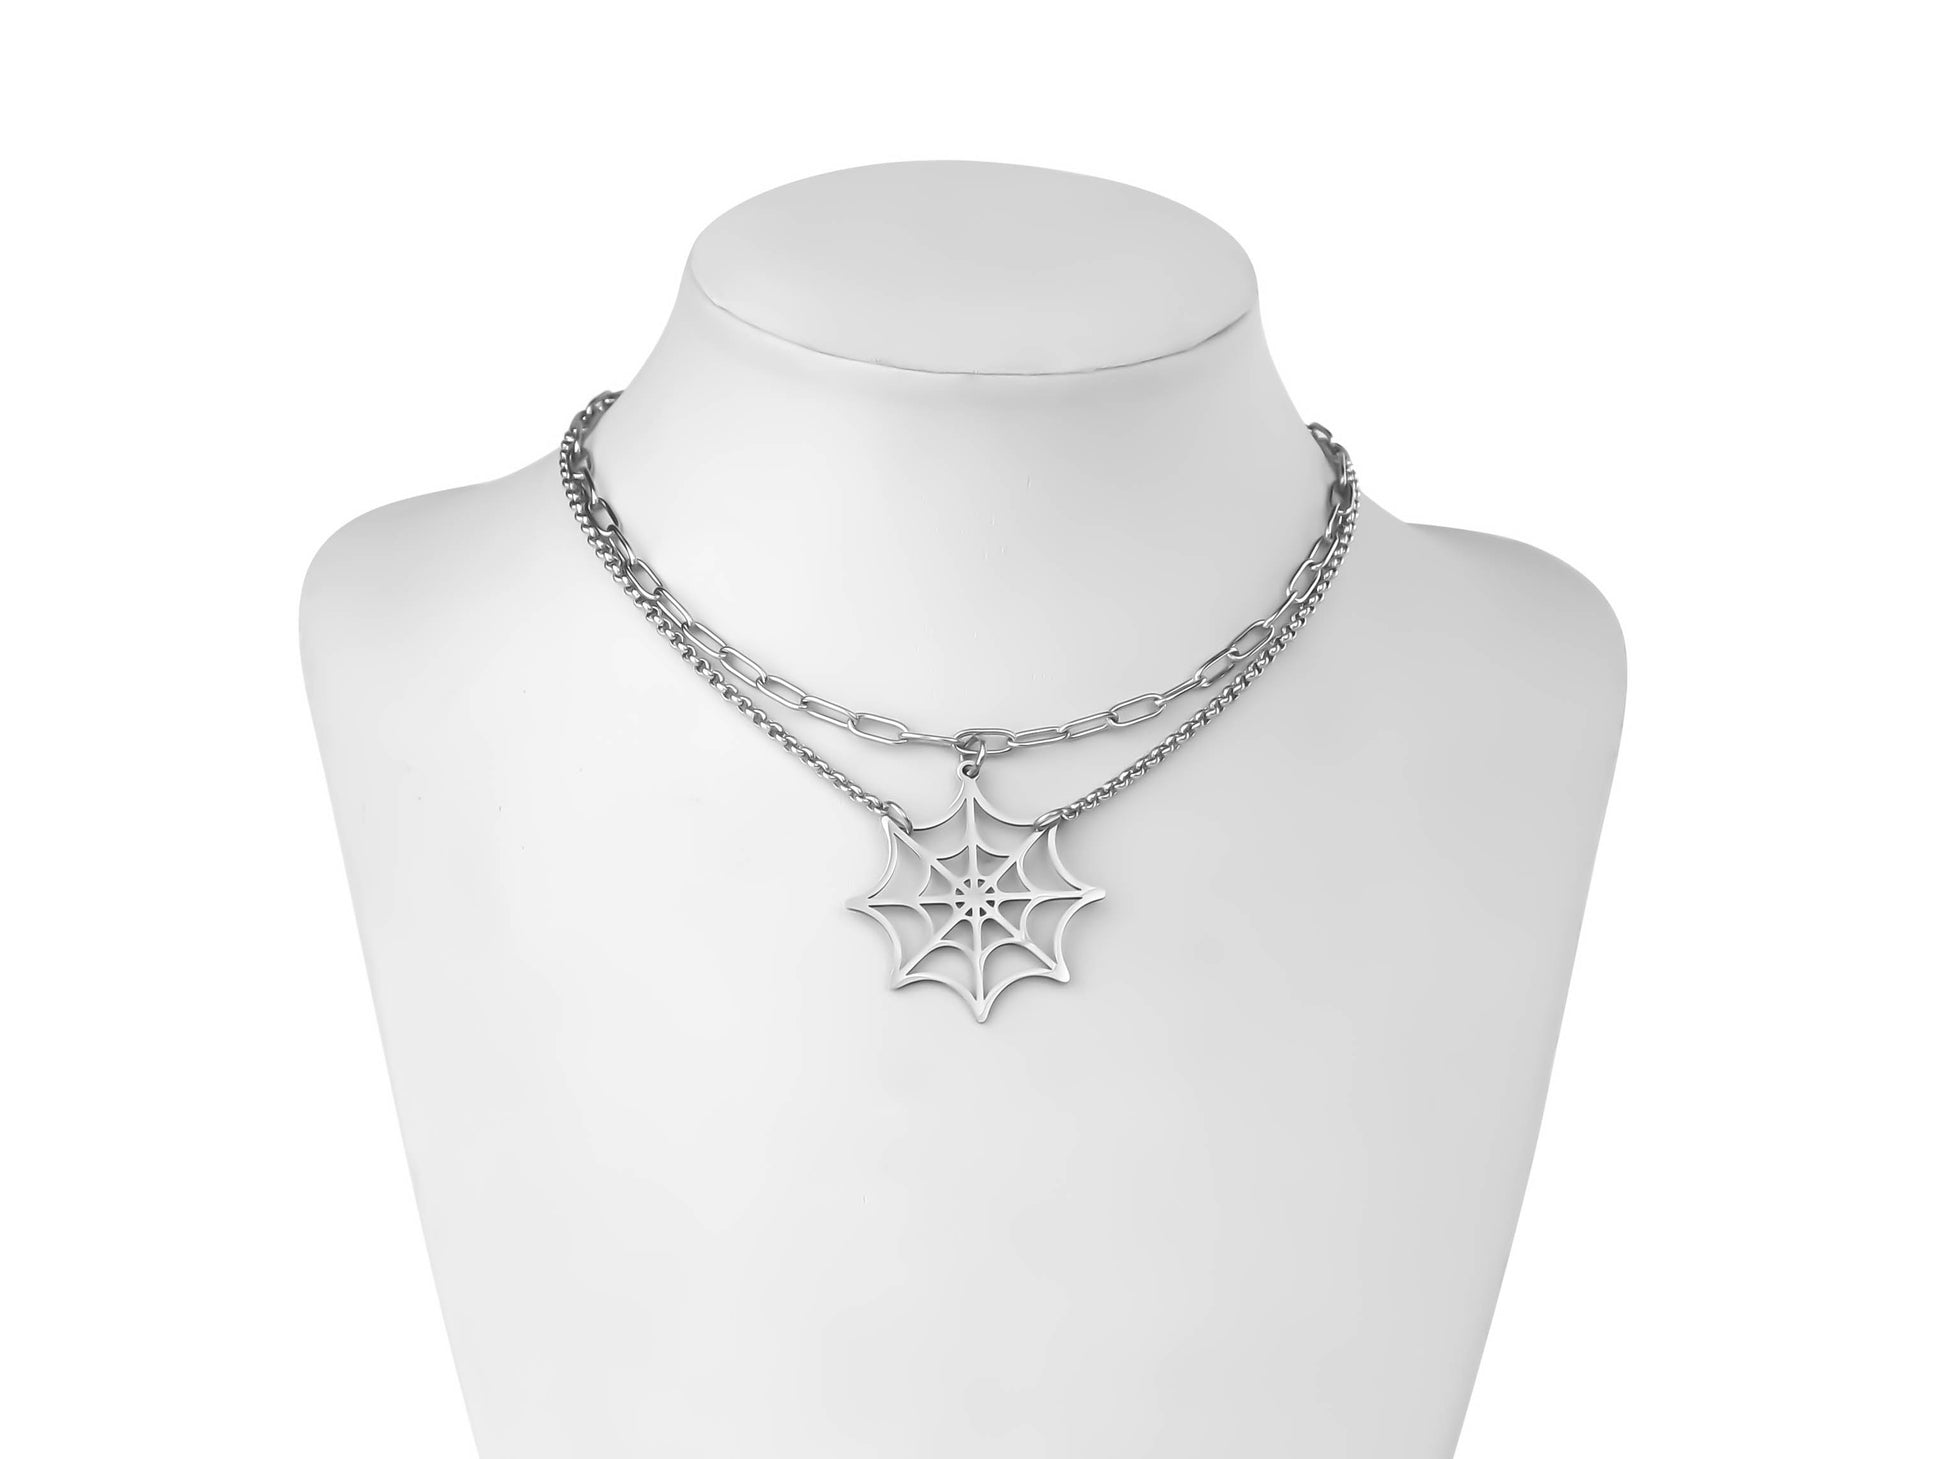 Displayed on a mannequin, a Myril Jewels chain necklace features a spiderweb pendant, merging neo-gothic style with whimsigoth delicacy. It's a striking accessory suitable for Halloween, rave parties, or as a distinctive everyday wear piece for lovers of gothic-chic and dark-avantgarde jewelry.